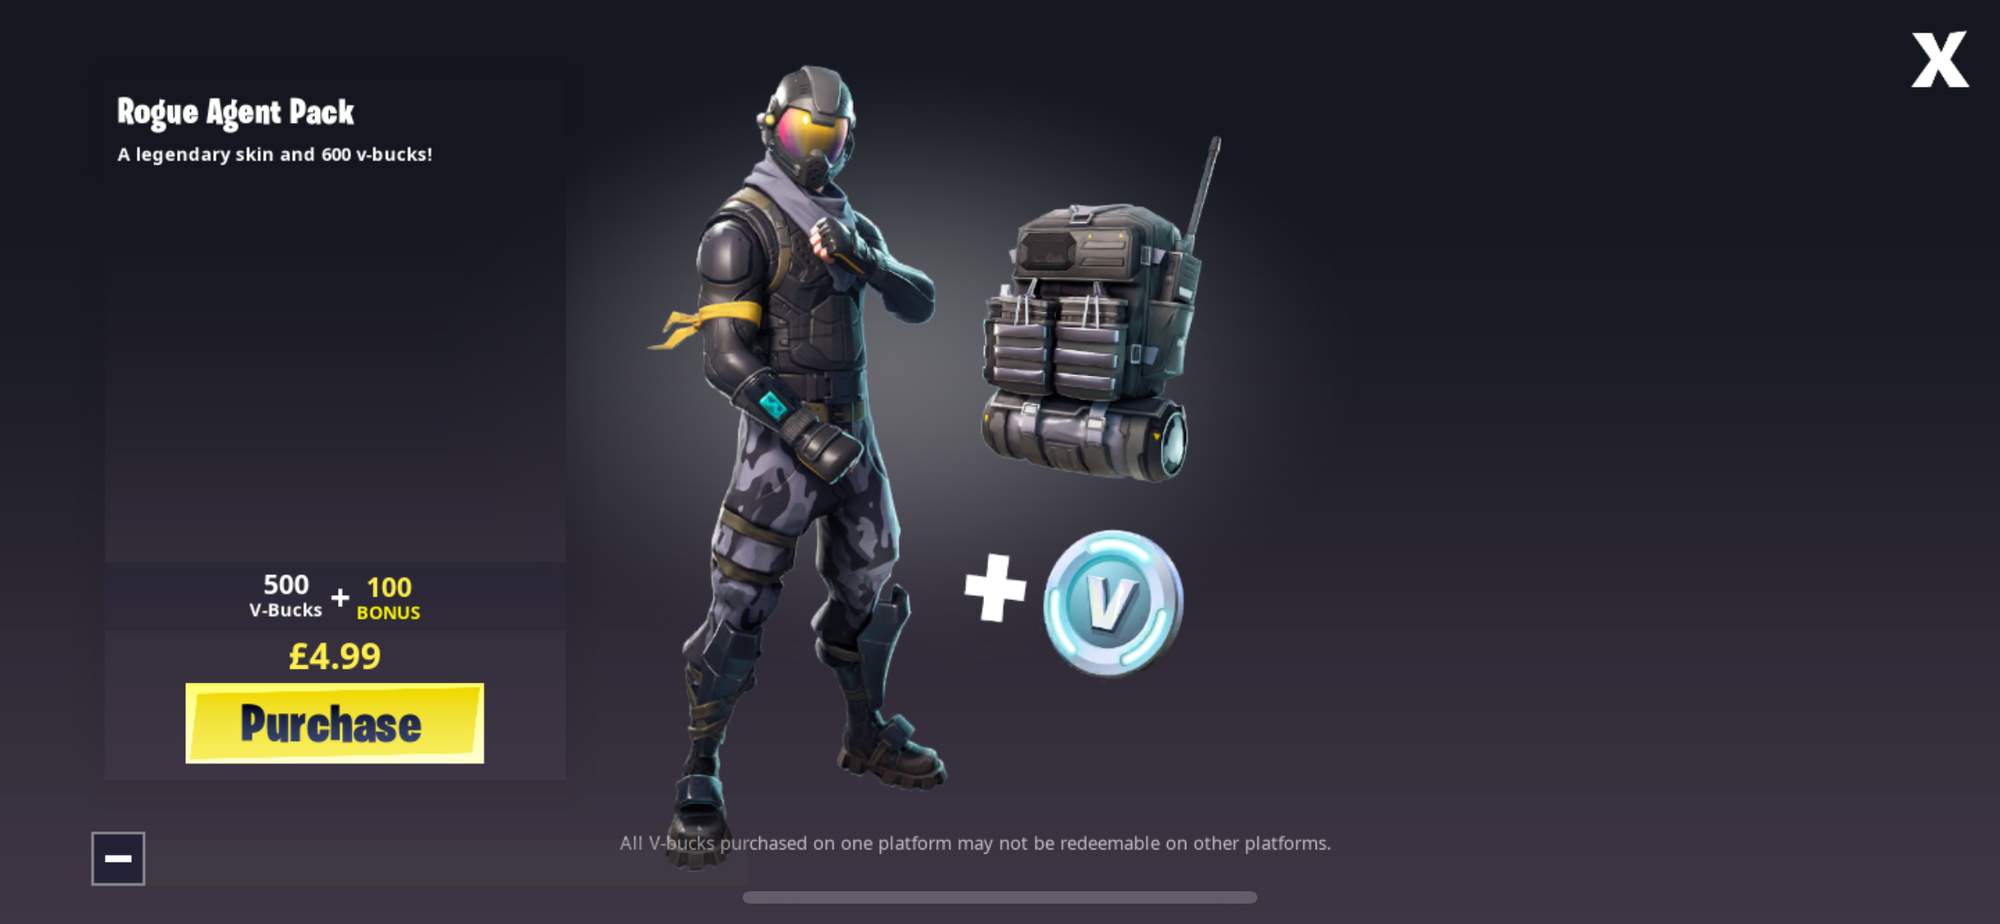 The Rogue Agent Starter Pack Is Available On The App Store For A